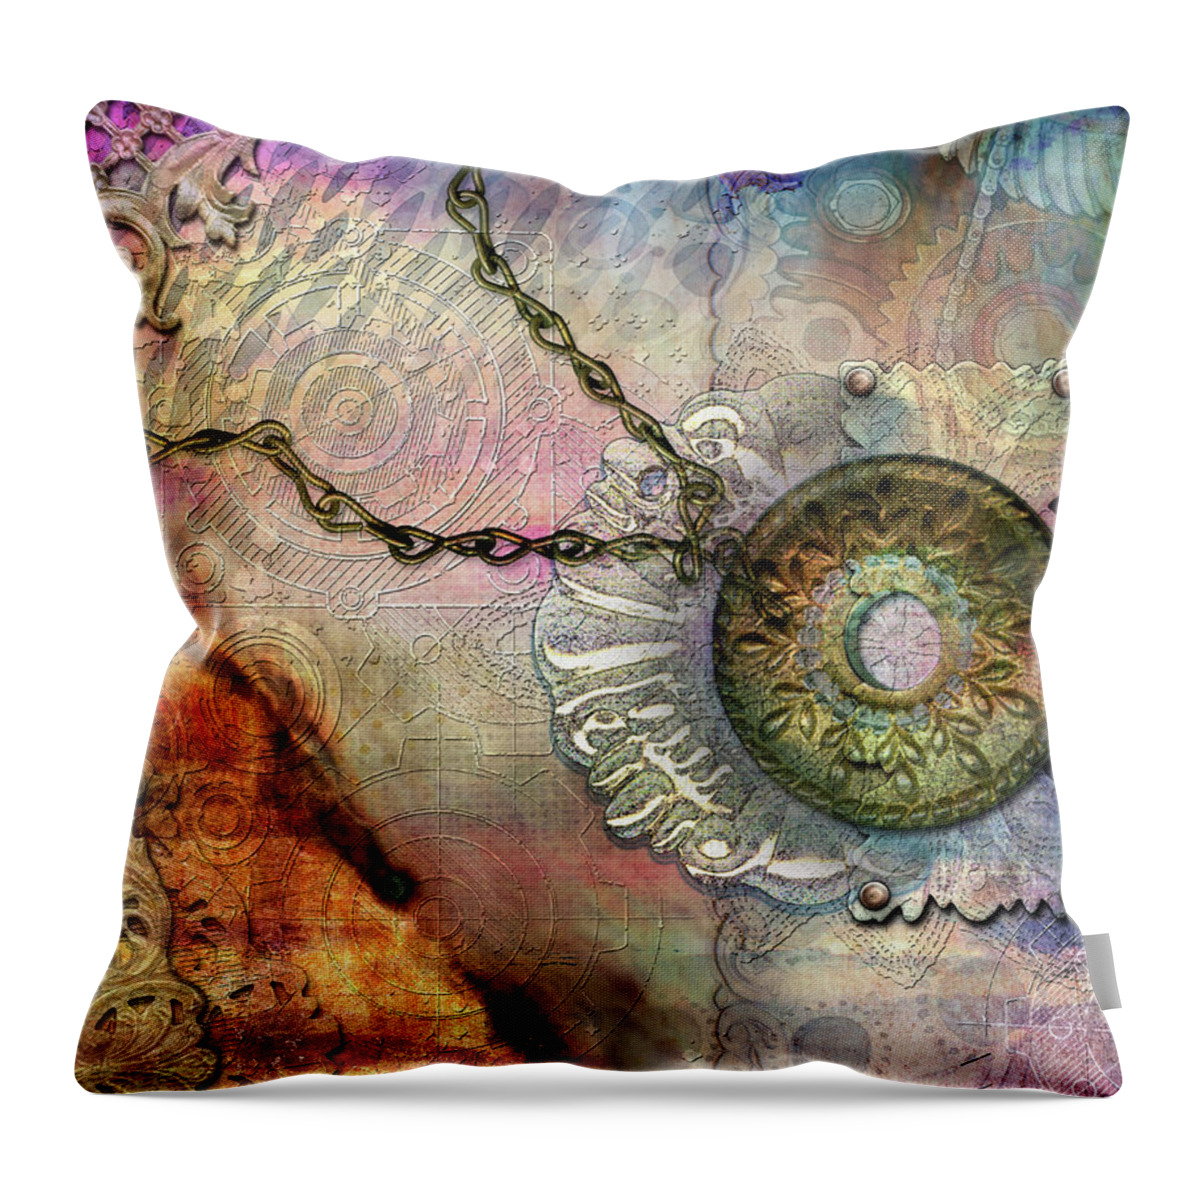 Textured Past Throw Pillow featuring the digital art Textured Past by Linda Carruth